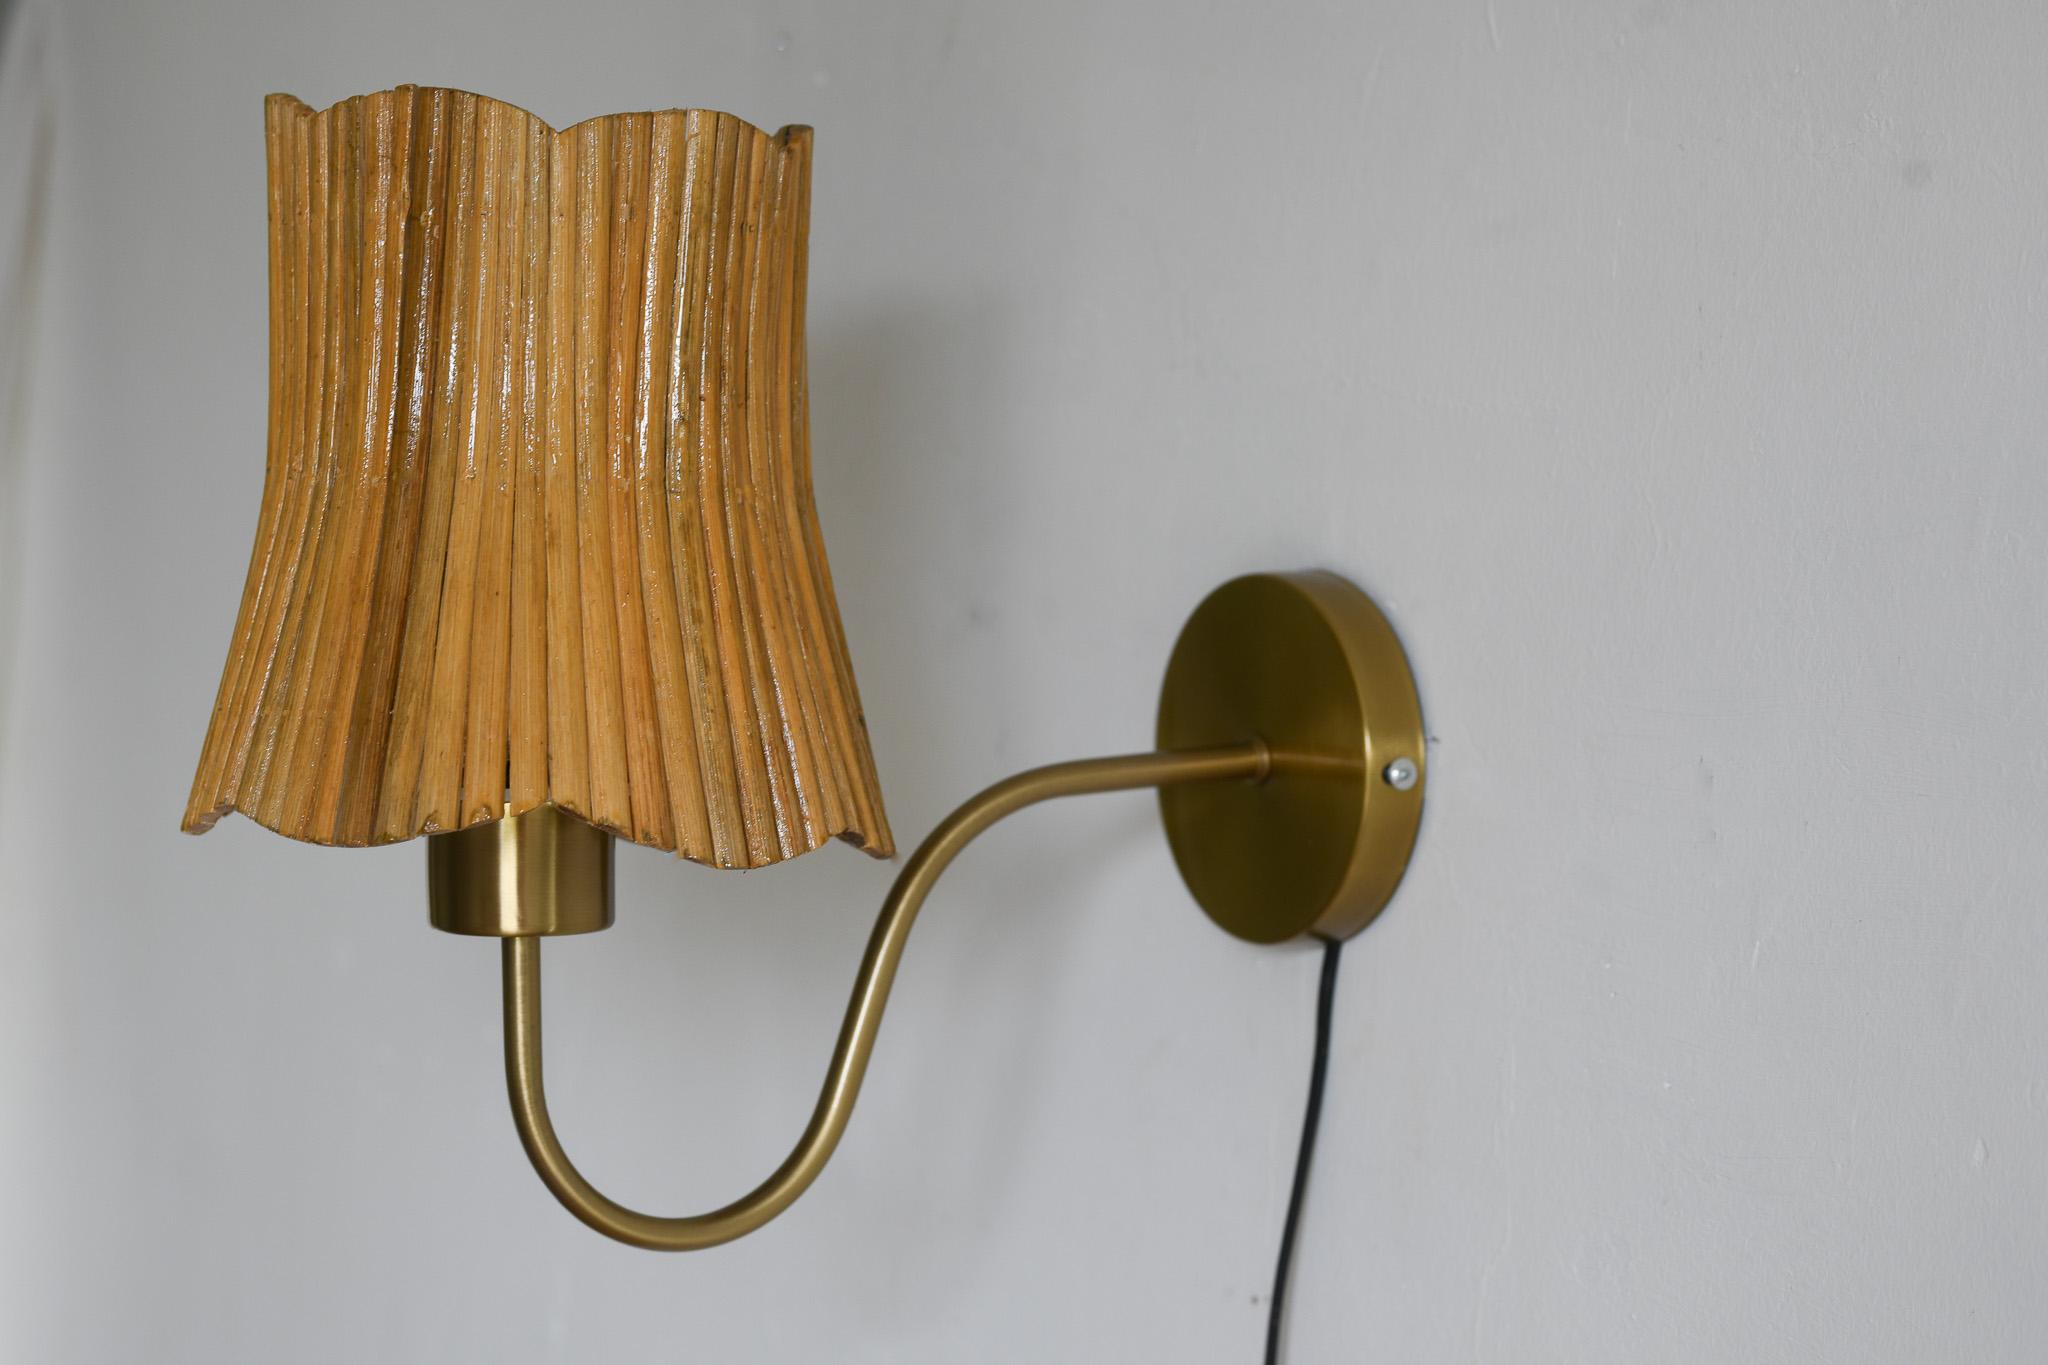 Hand-Crafted Mid century Modern Wall Sconce Lamp Floral Shape For Sale